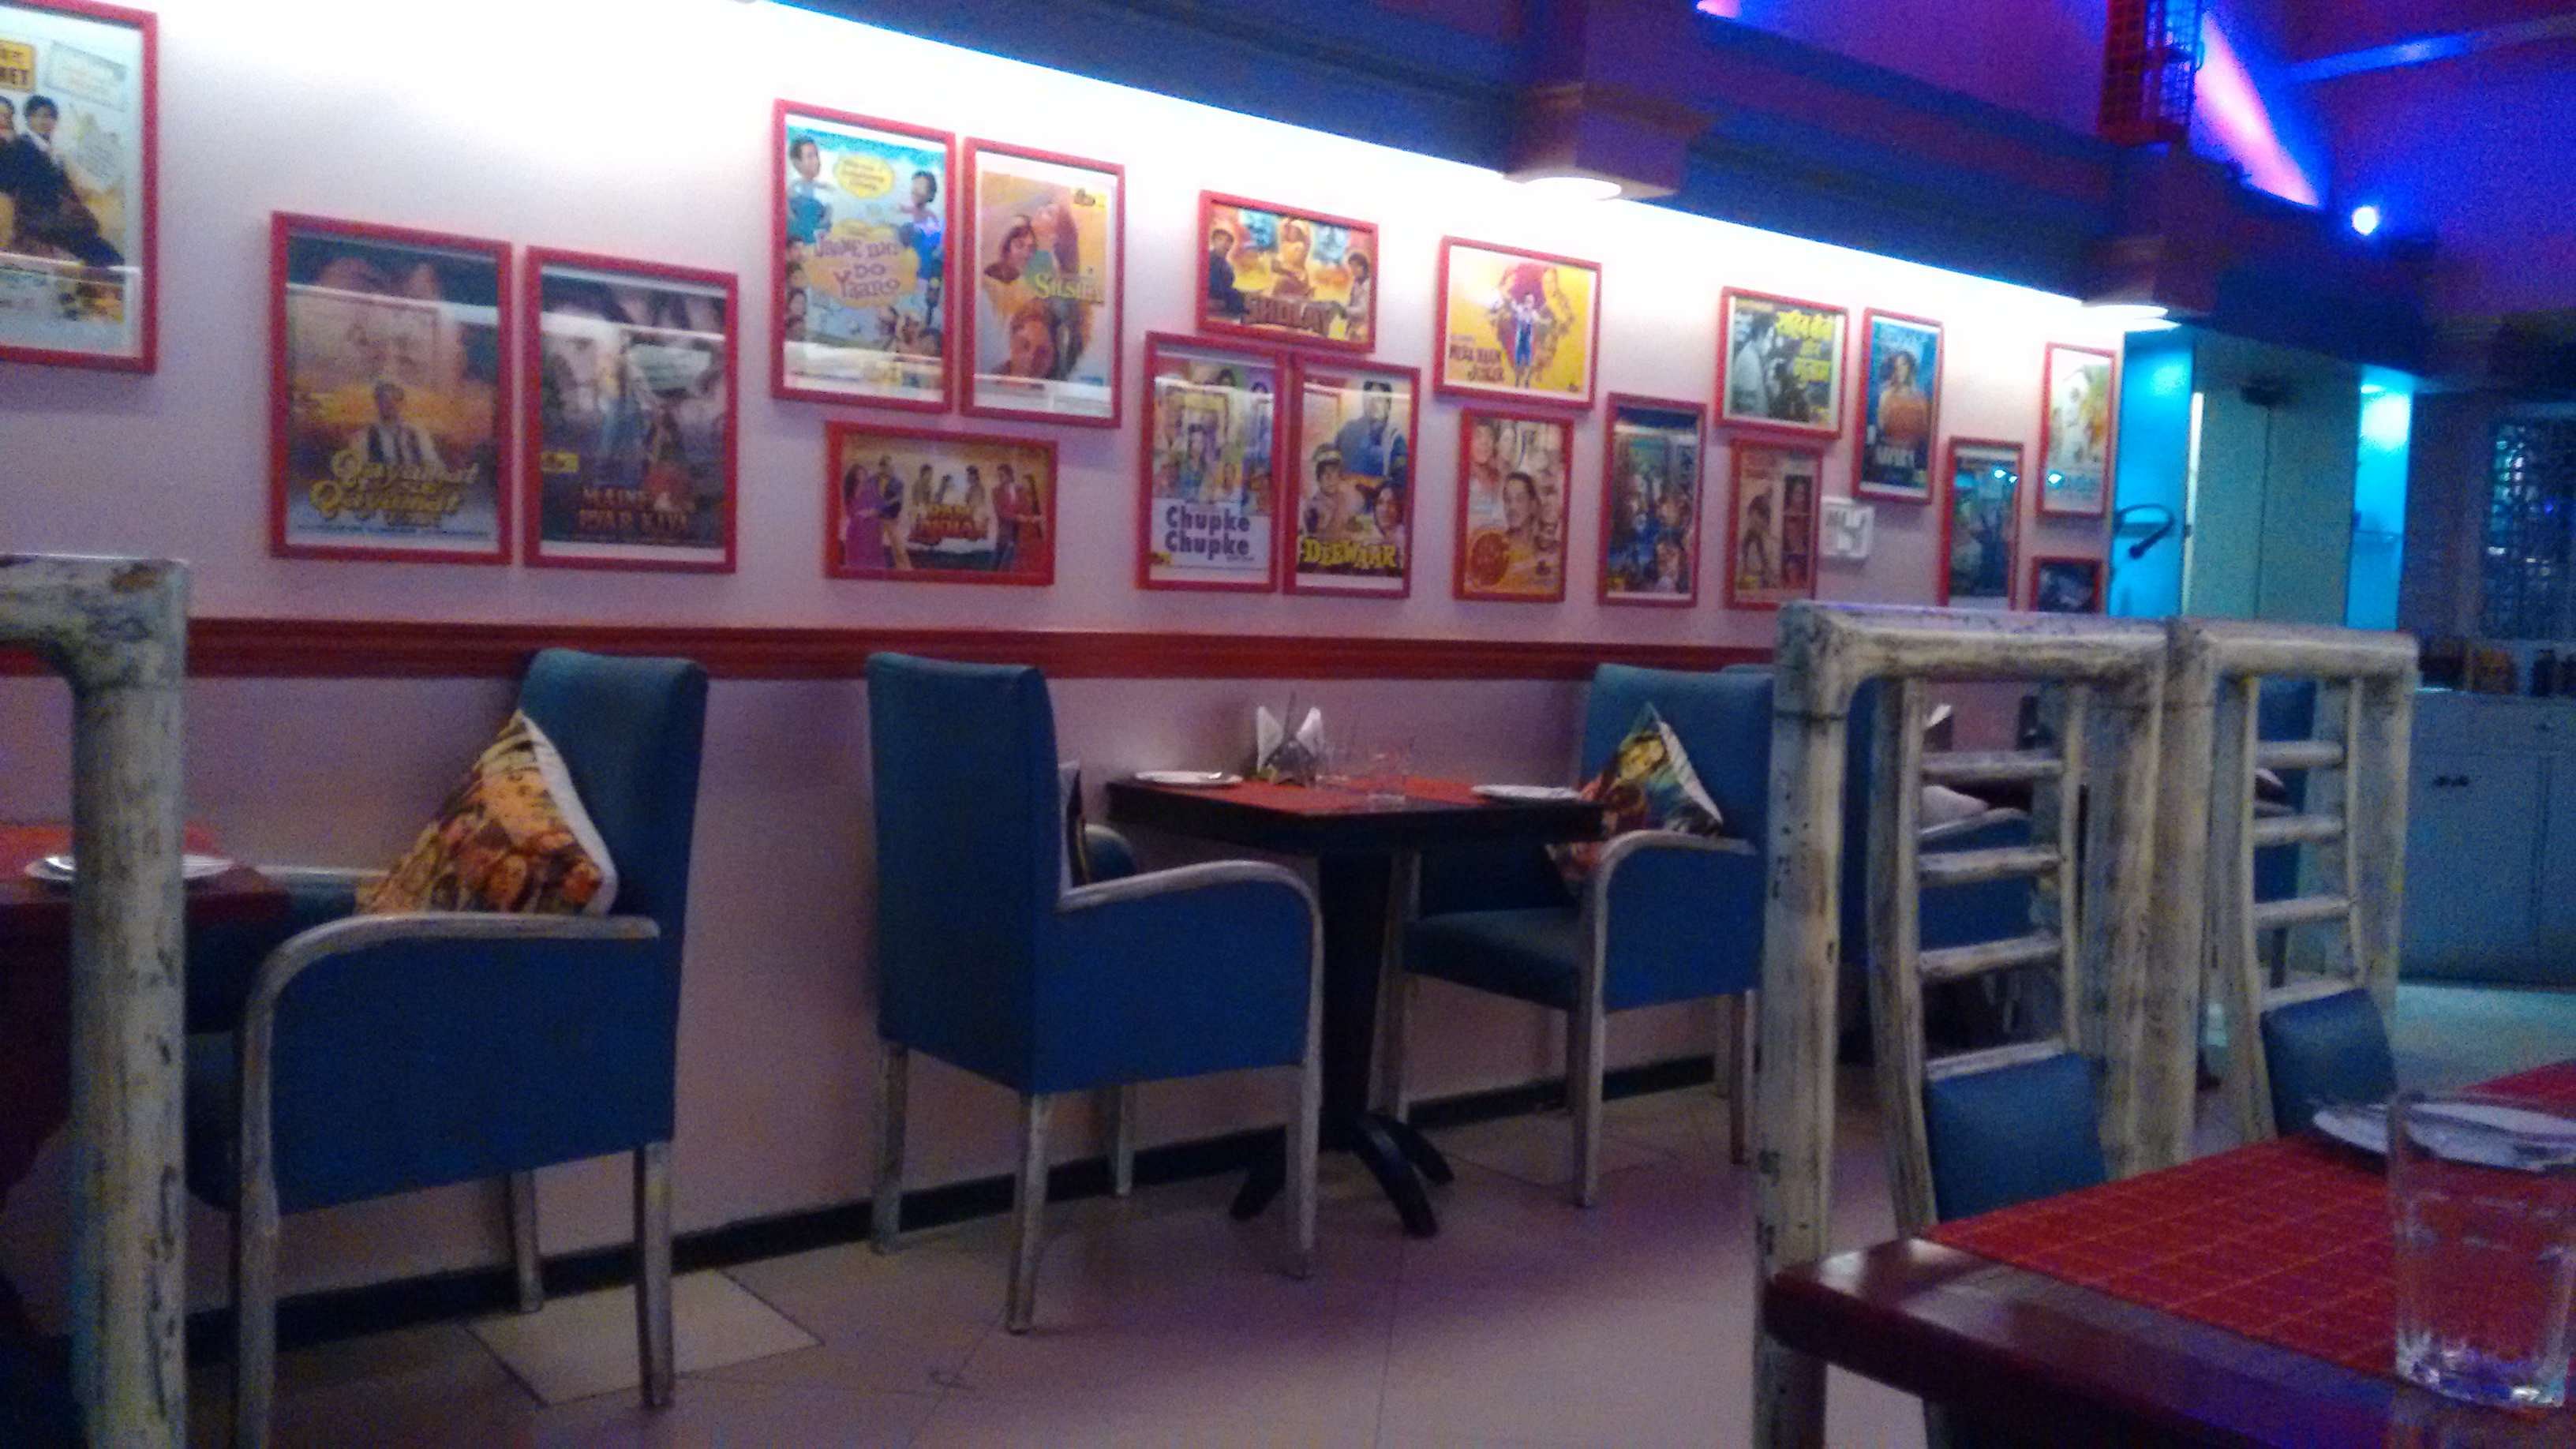 Filmy Cafe Bar in Connaught Place, Delhi